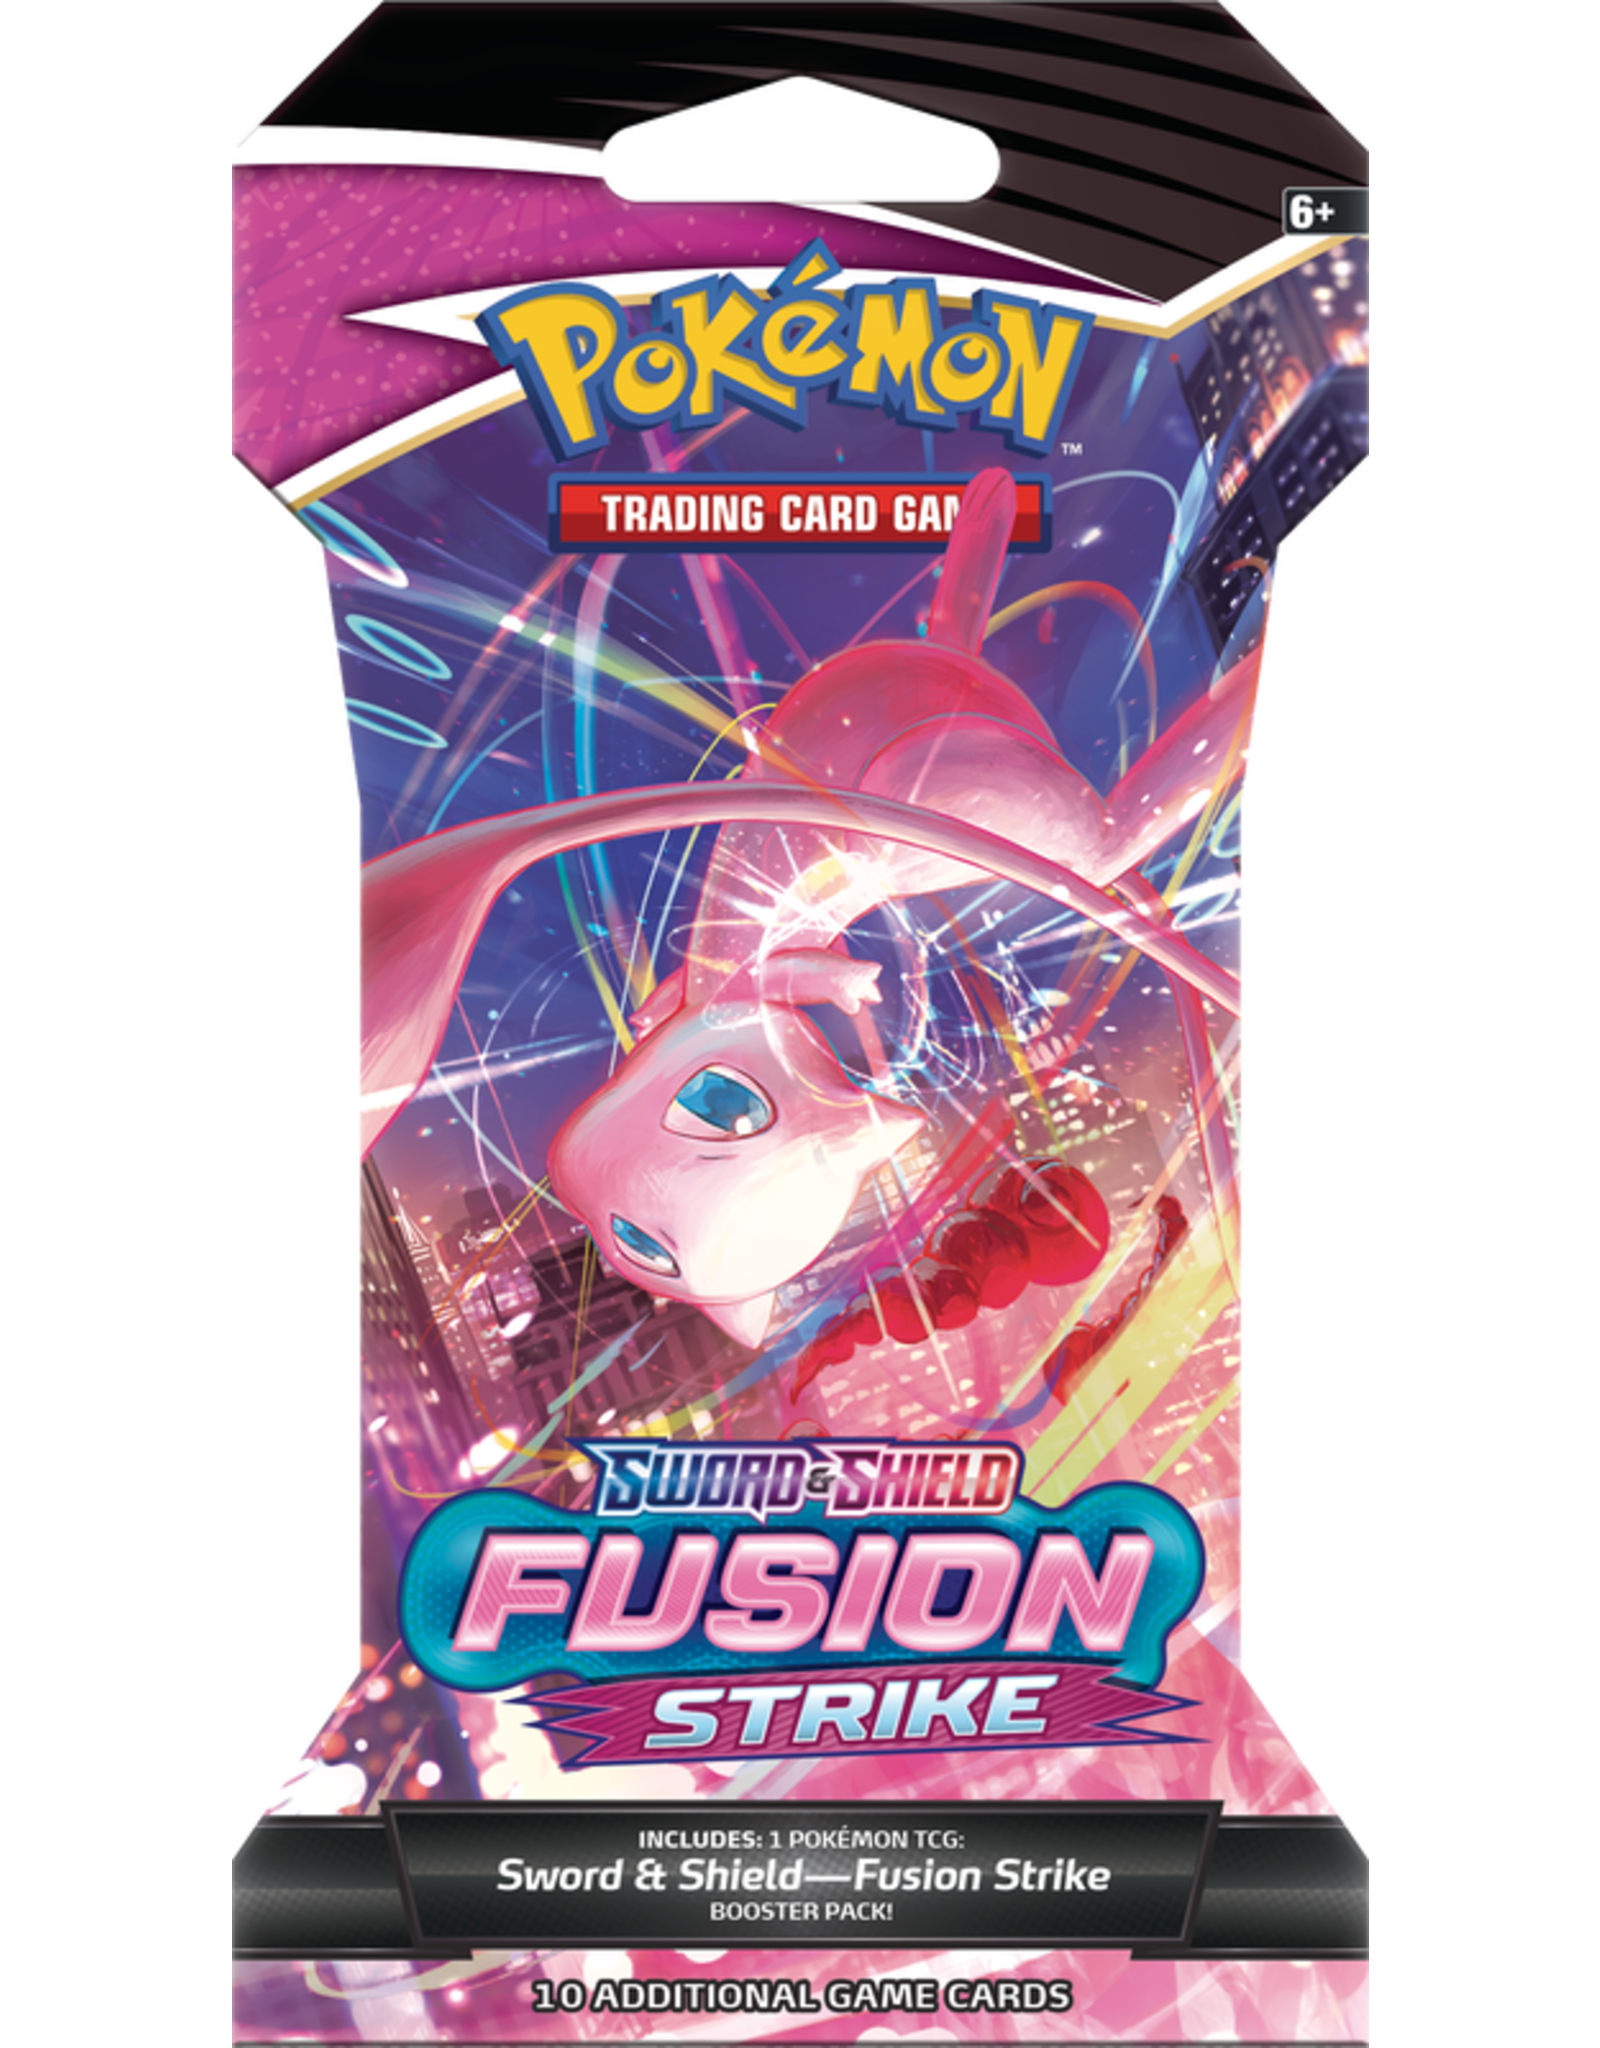 The Pokemon Company Pokémon Trading Card Game - Fusion Strike - Sleeved Booster Pack